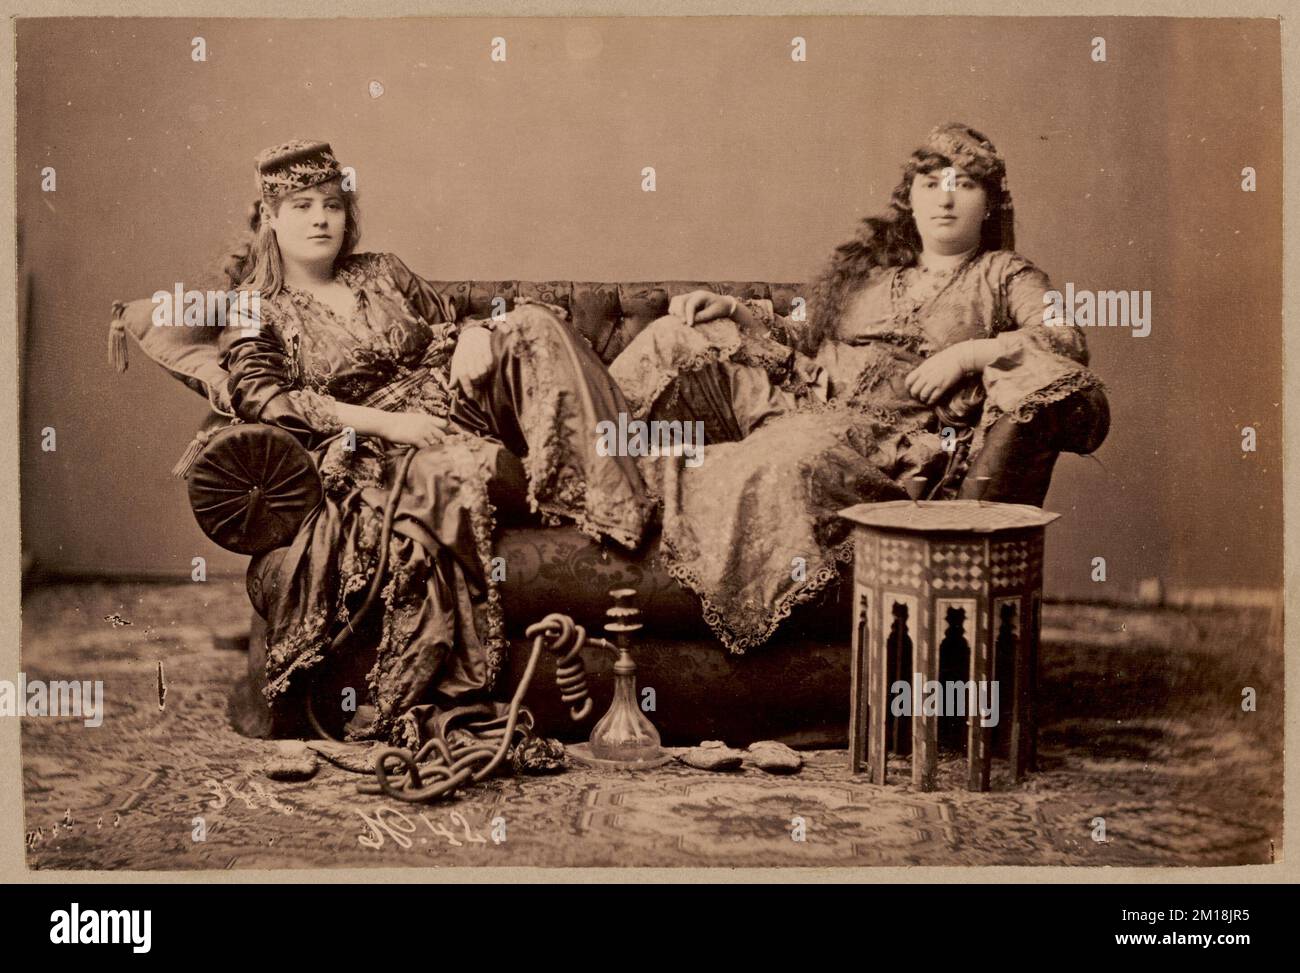 Studio portrait of two women in traditional Turkish dress , Clothing & dress, Water pipes Smoking. Nicholas Catsimpoolas Collection Stock Photo